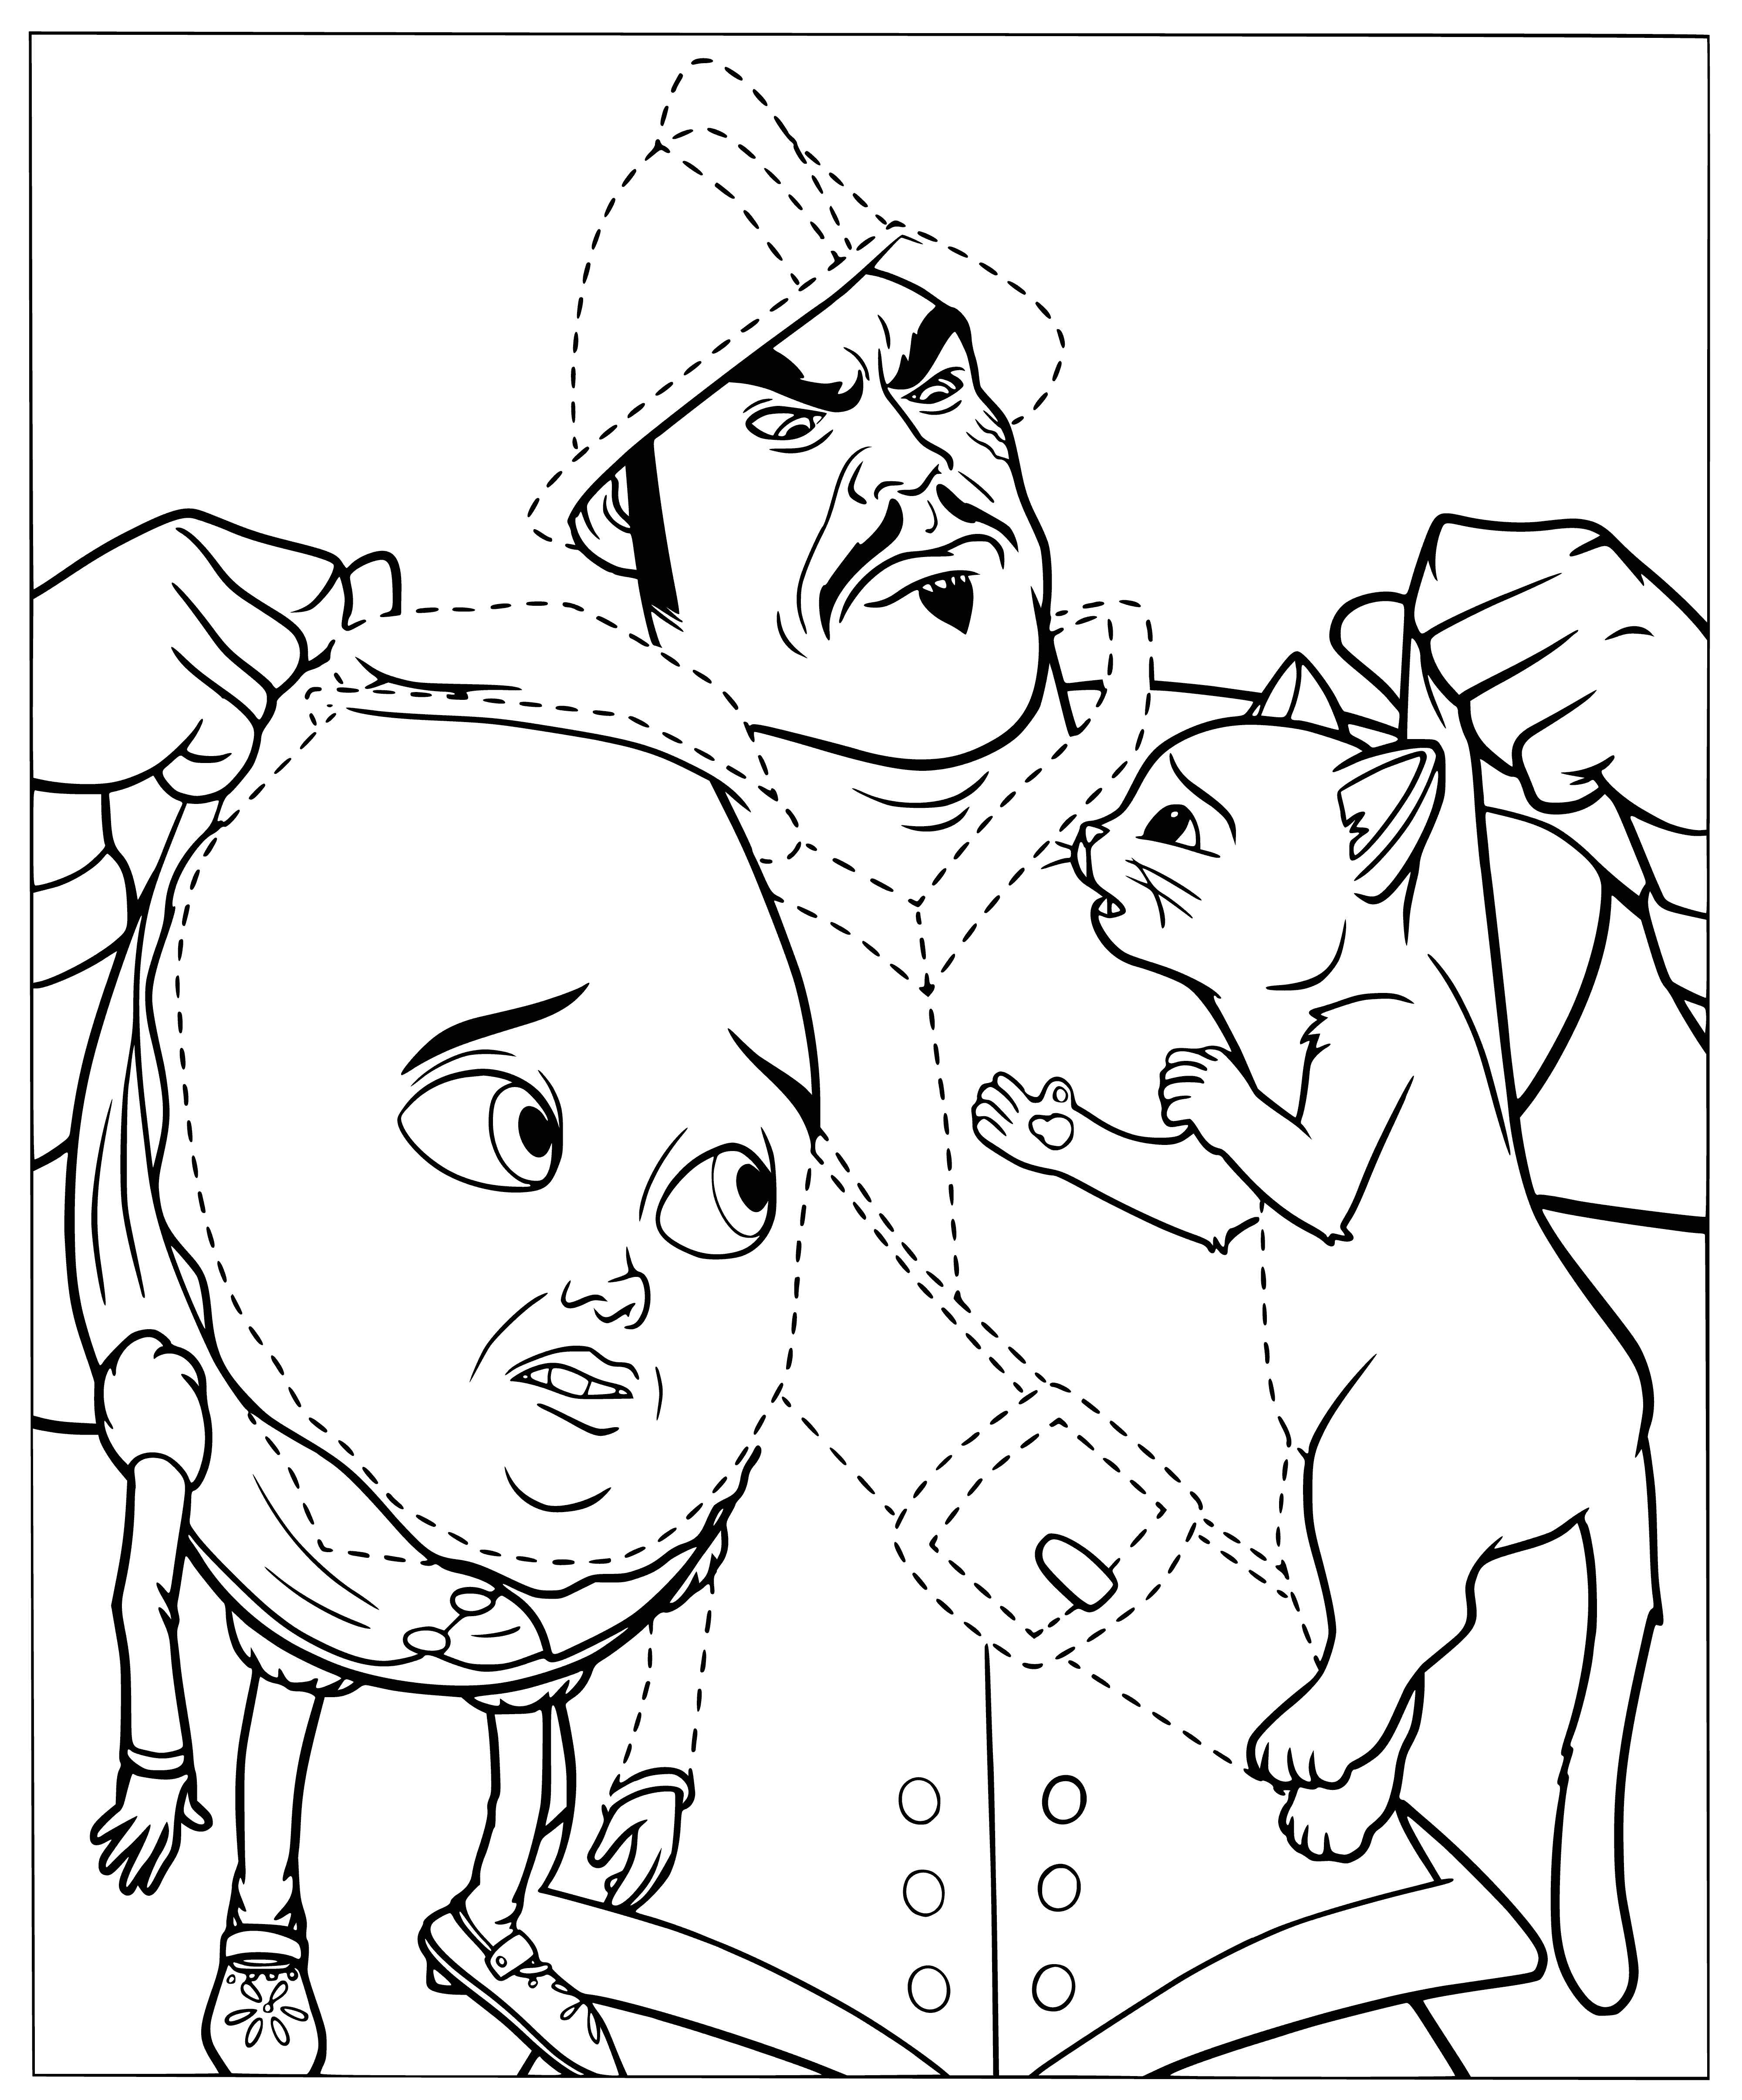 The commander caught the thief coloring page